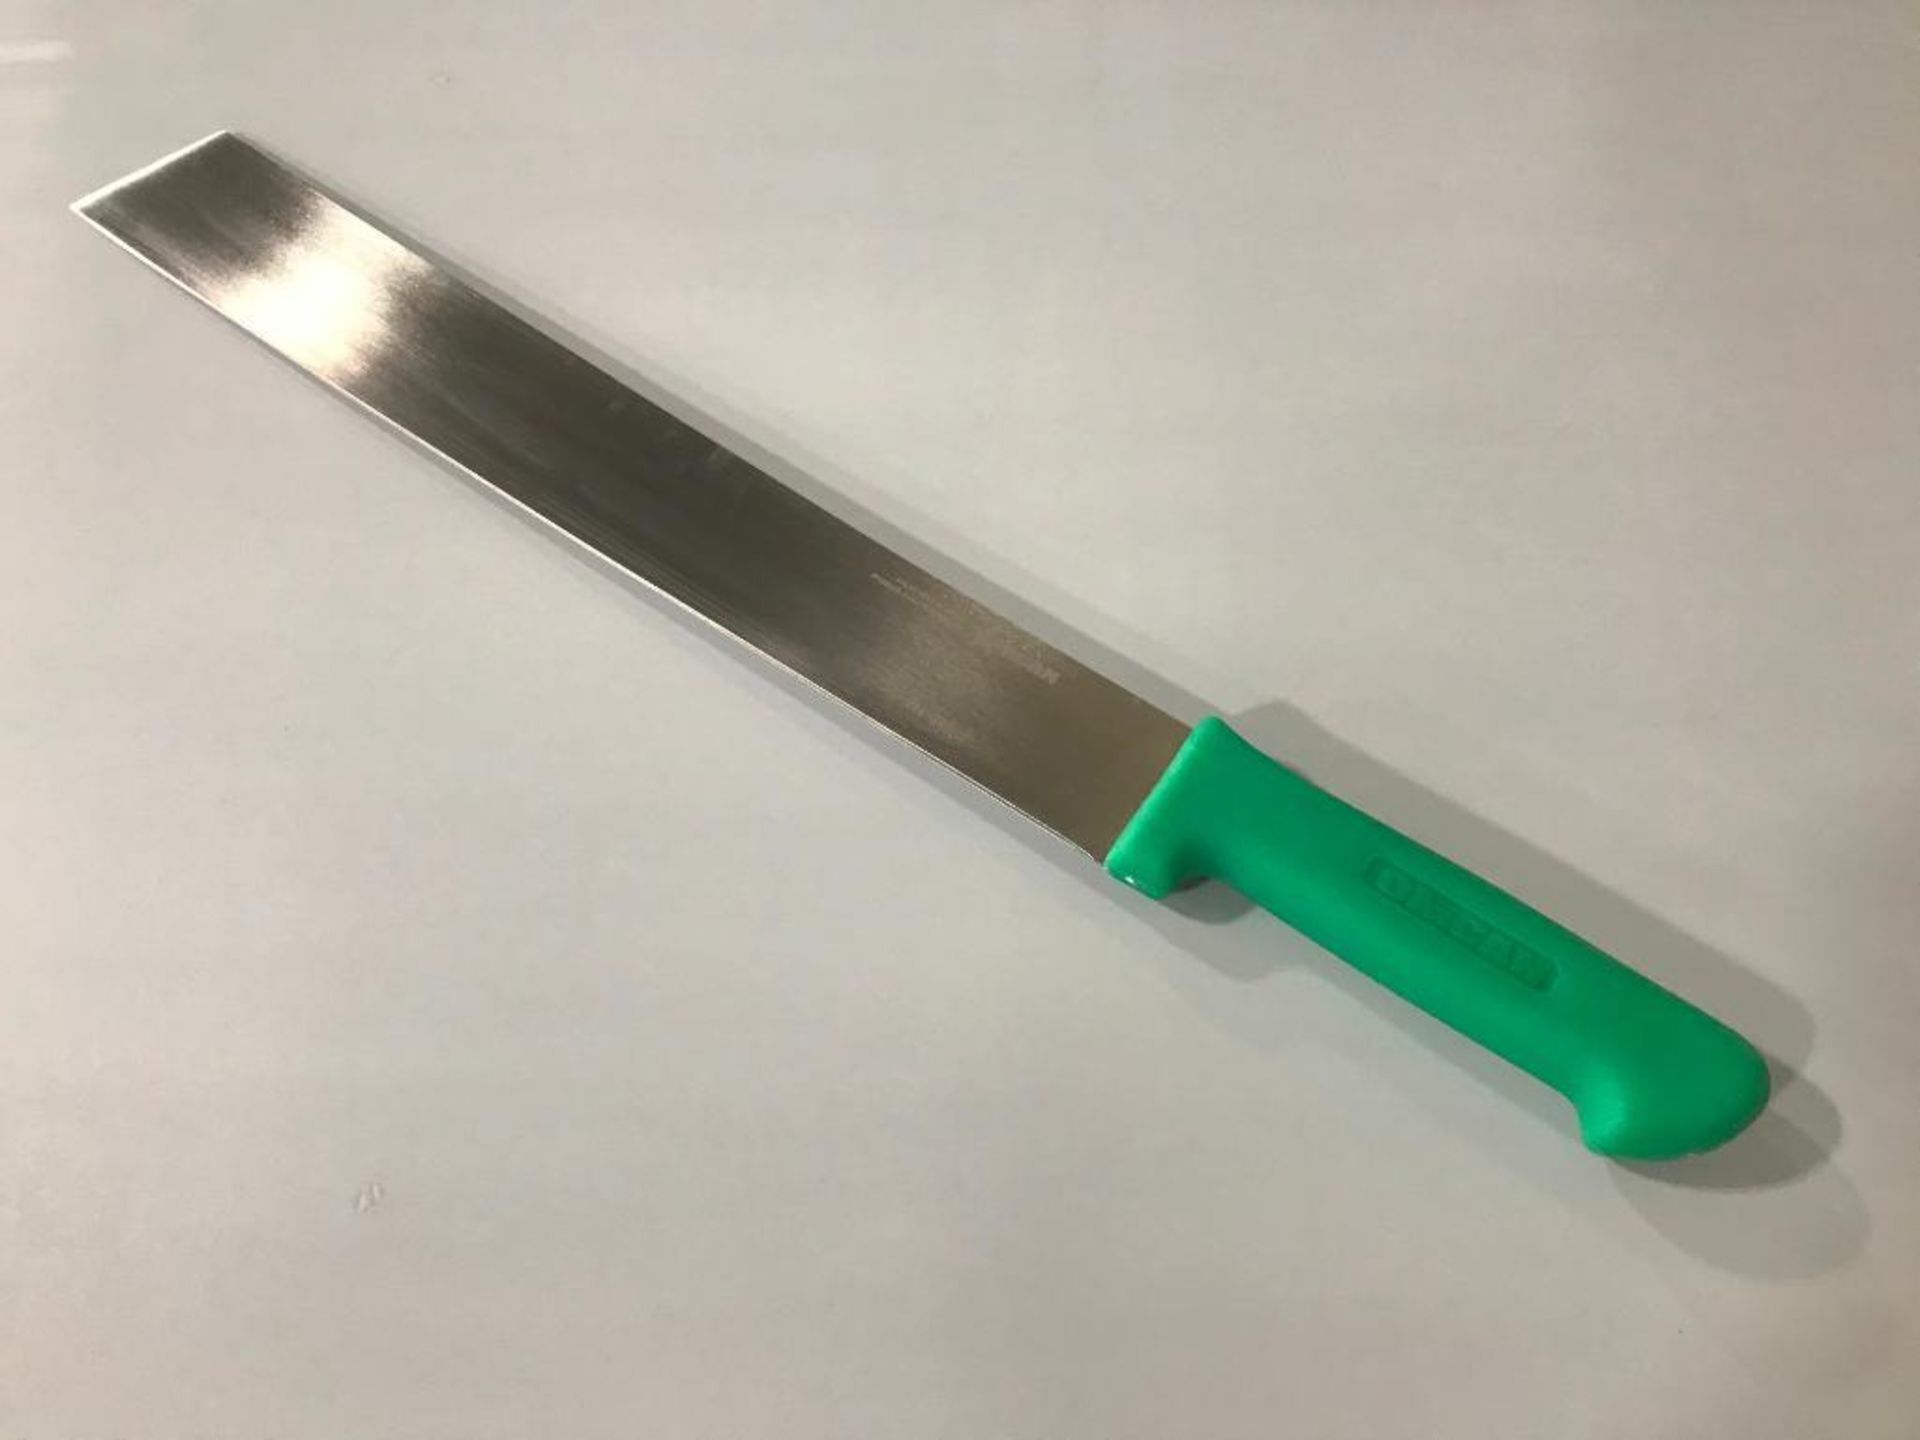 OMCAN 14" WATERMELON KNIFE - GREEN HANDLE - OMCAN 18739 - NEW - Image 3 of 4